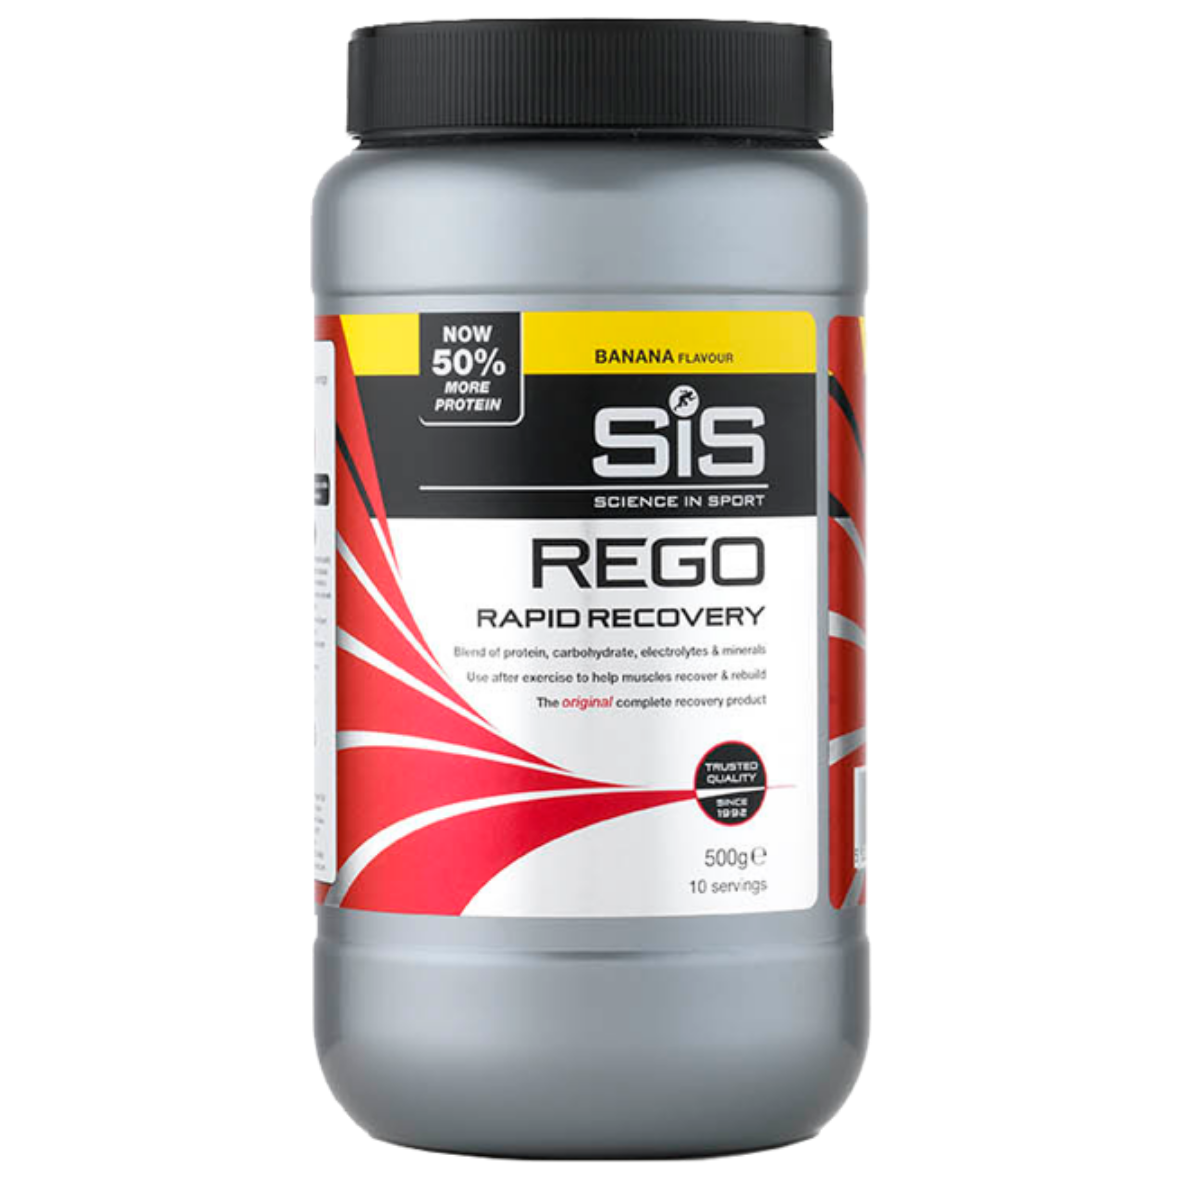 Science in Sport REGO Rapid Recovery Banana